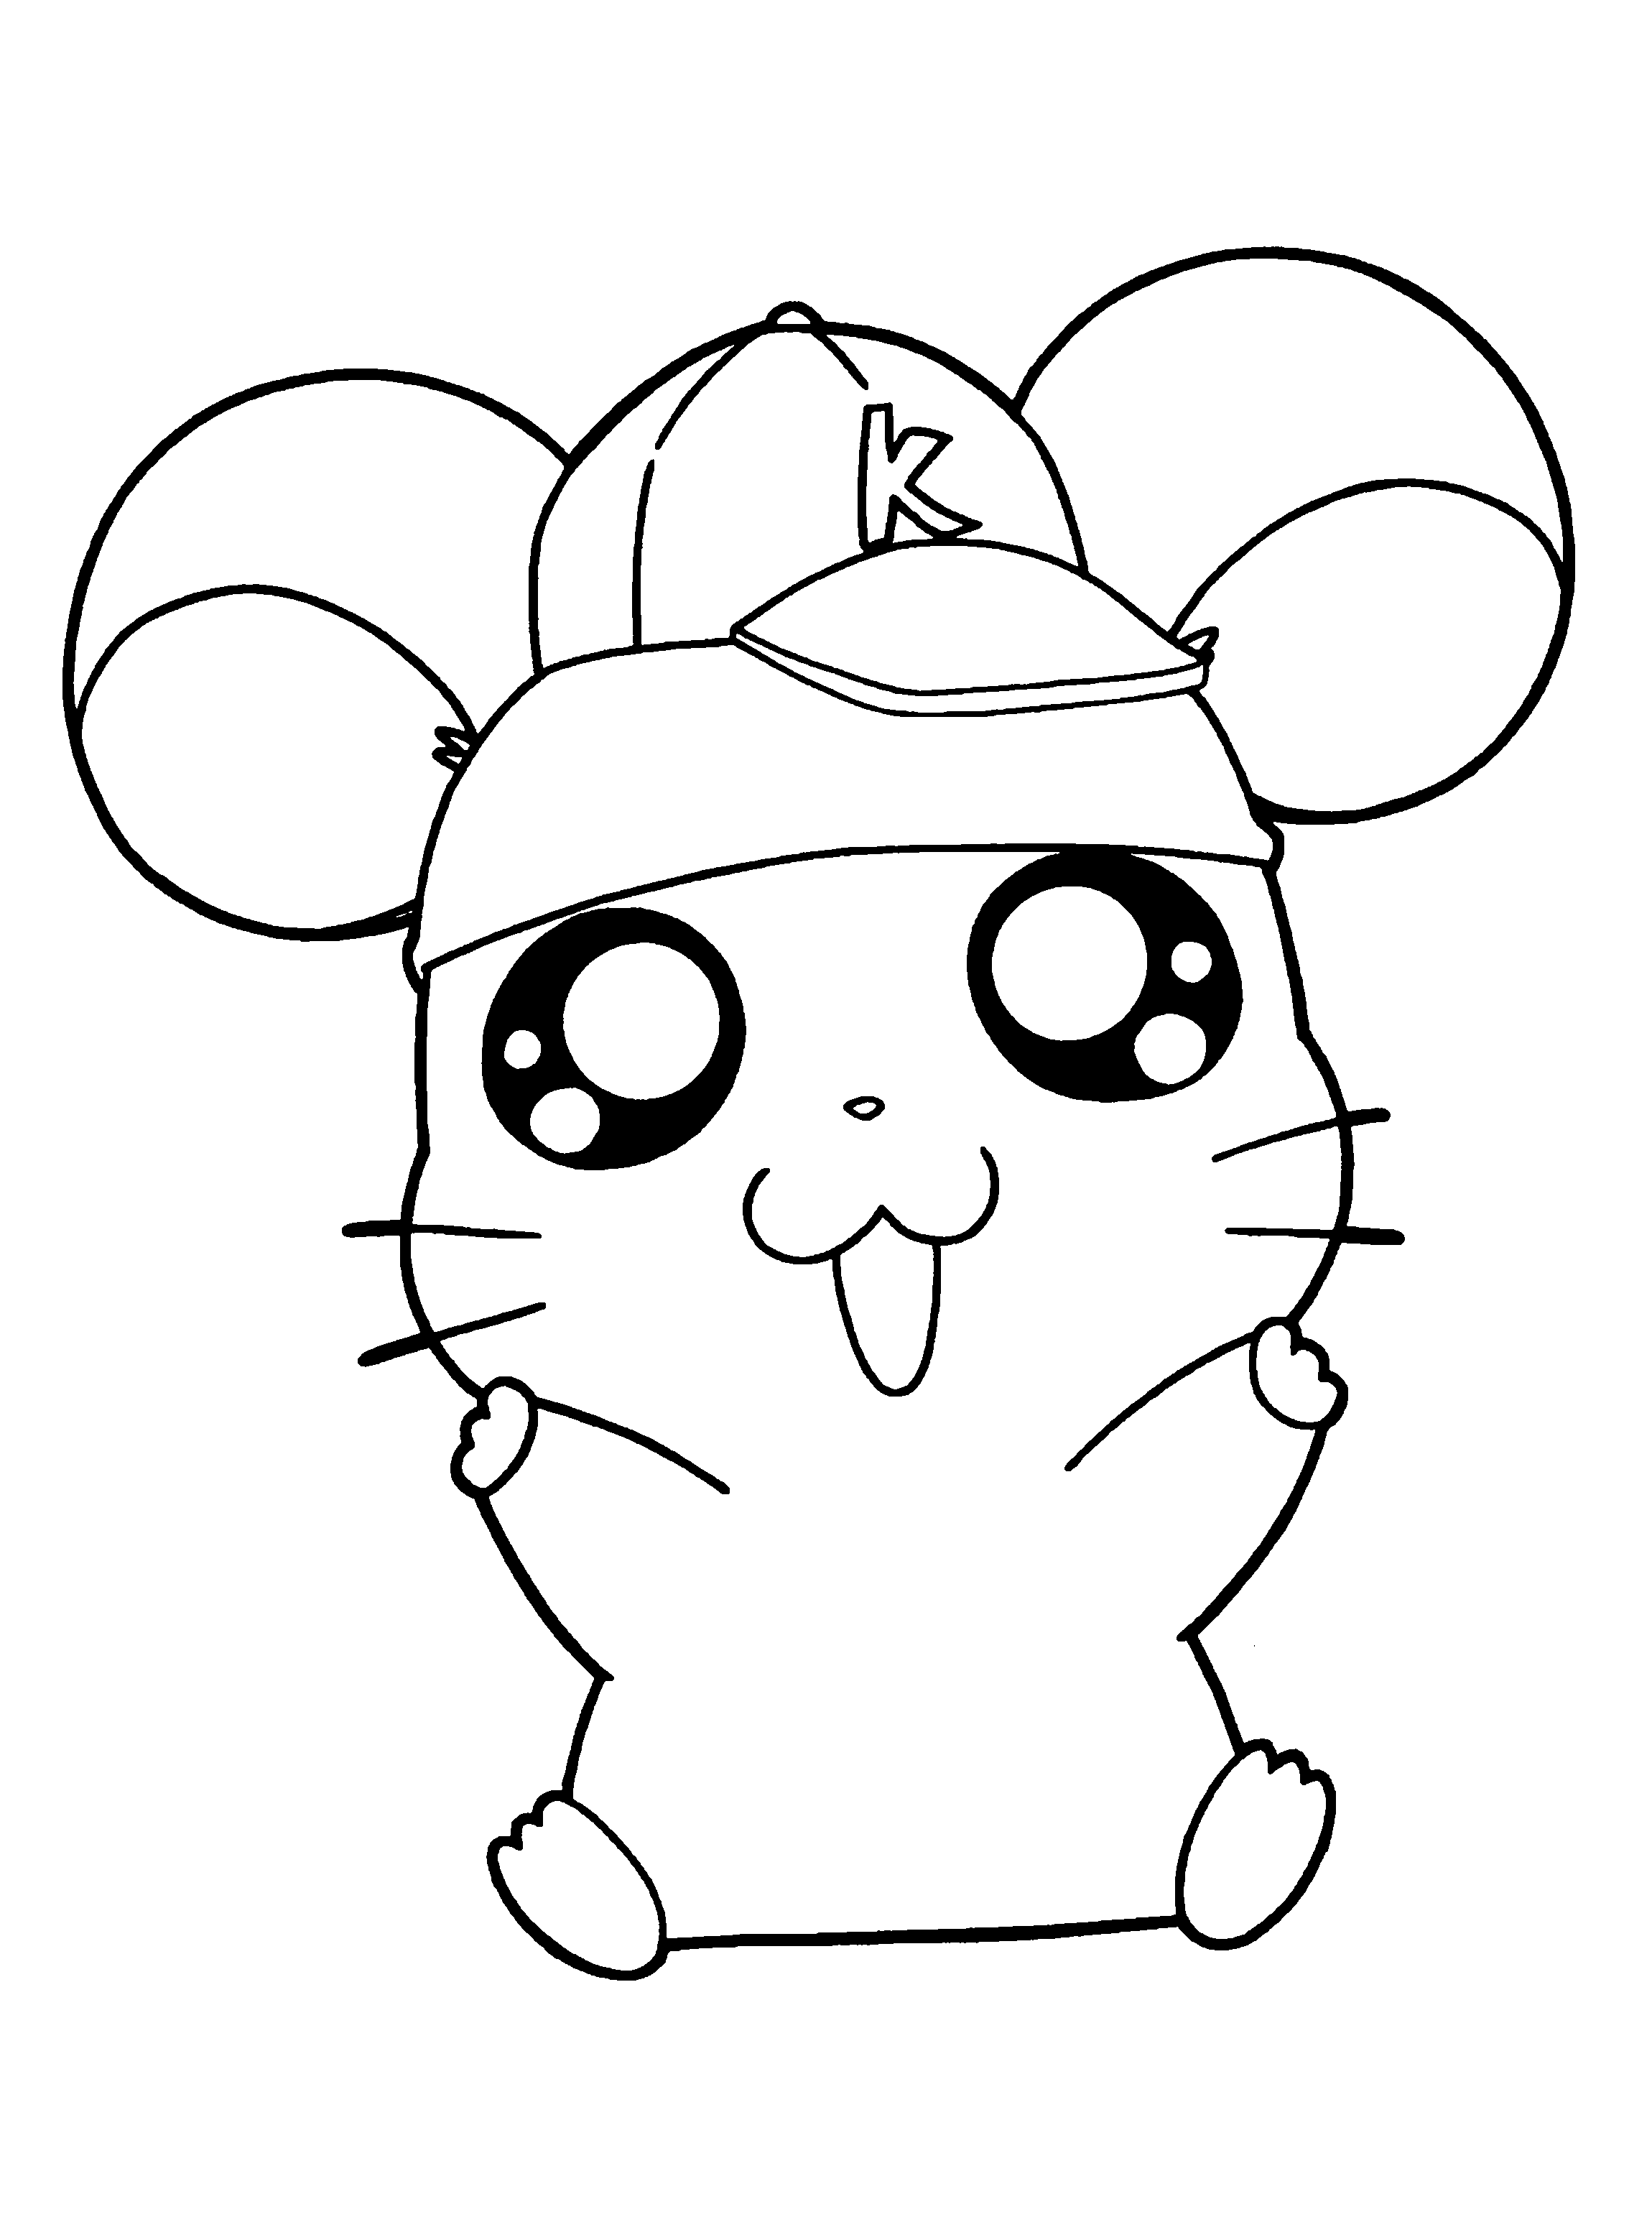 Cute Hamtaro Coloring Pages drawing free image download